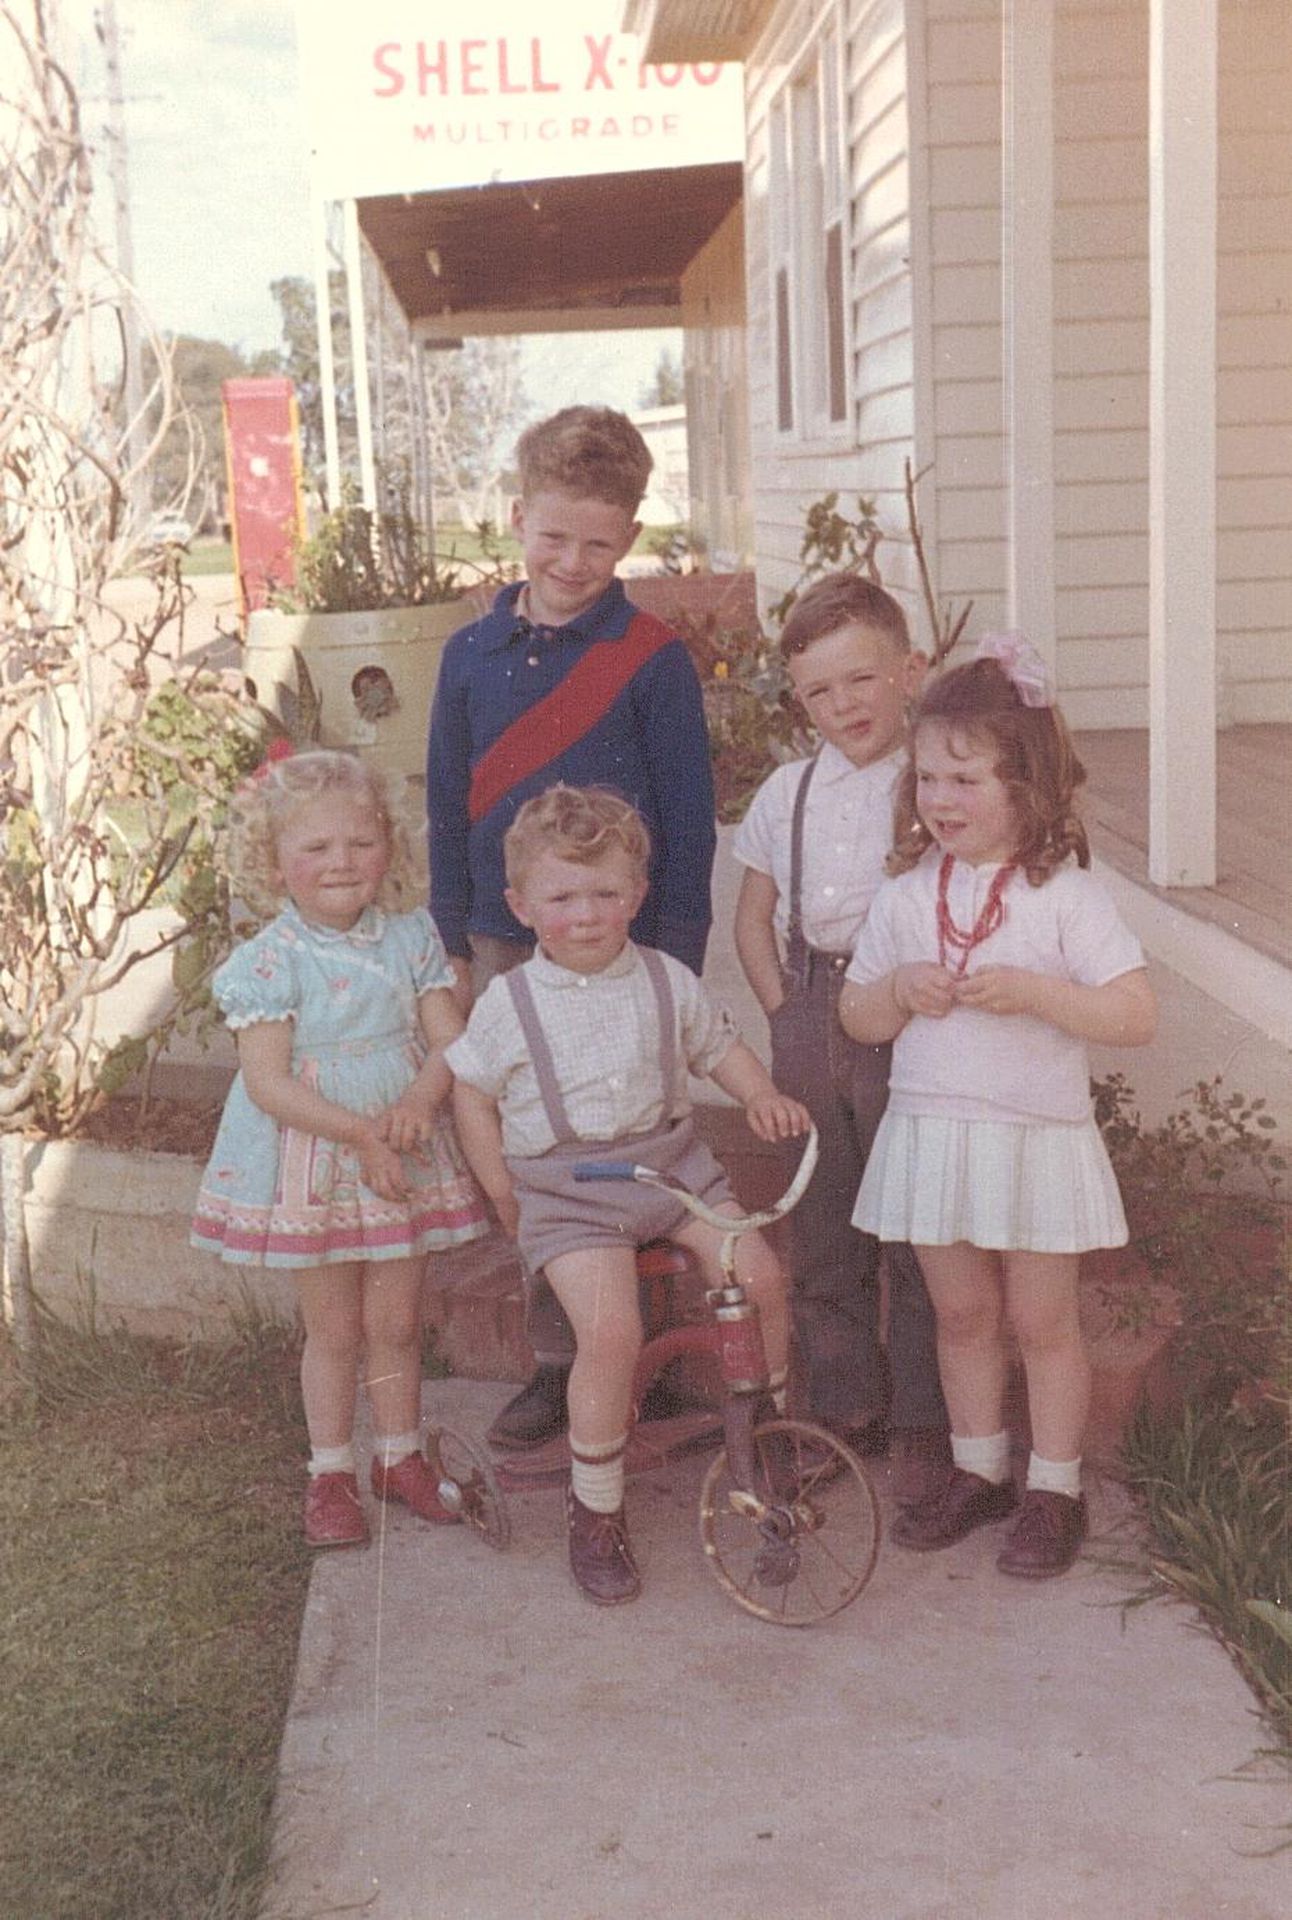 Janette, John, me, Michael and Cindy at Mathoura, August 1965.